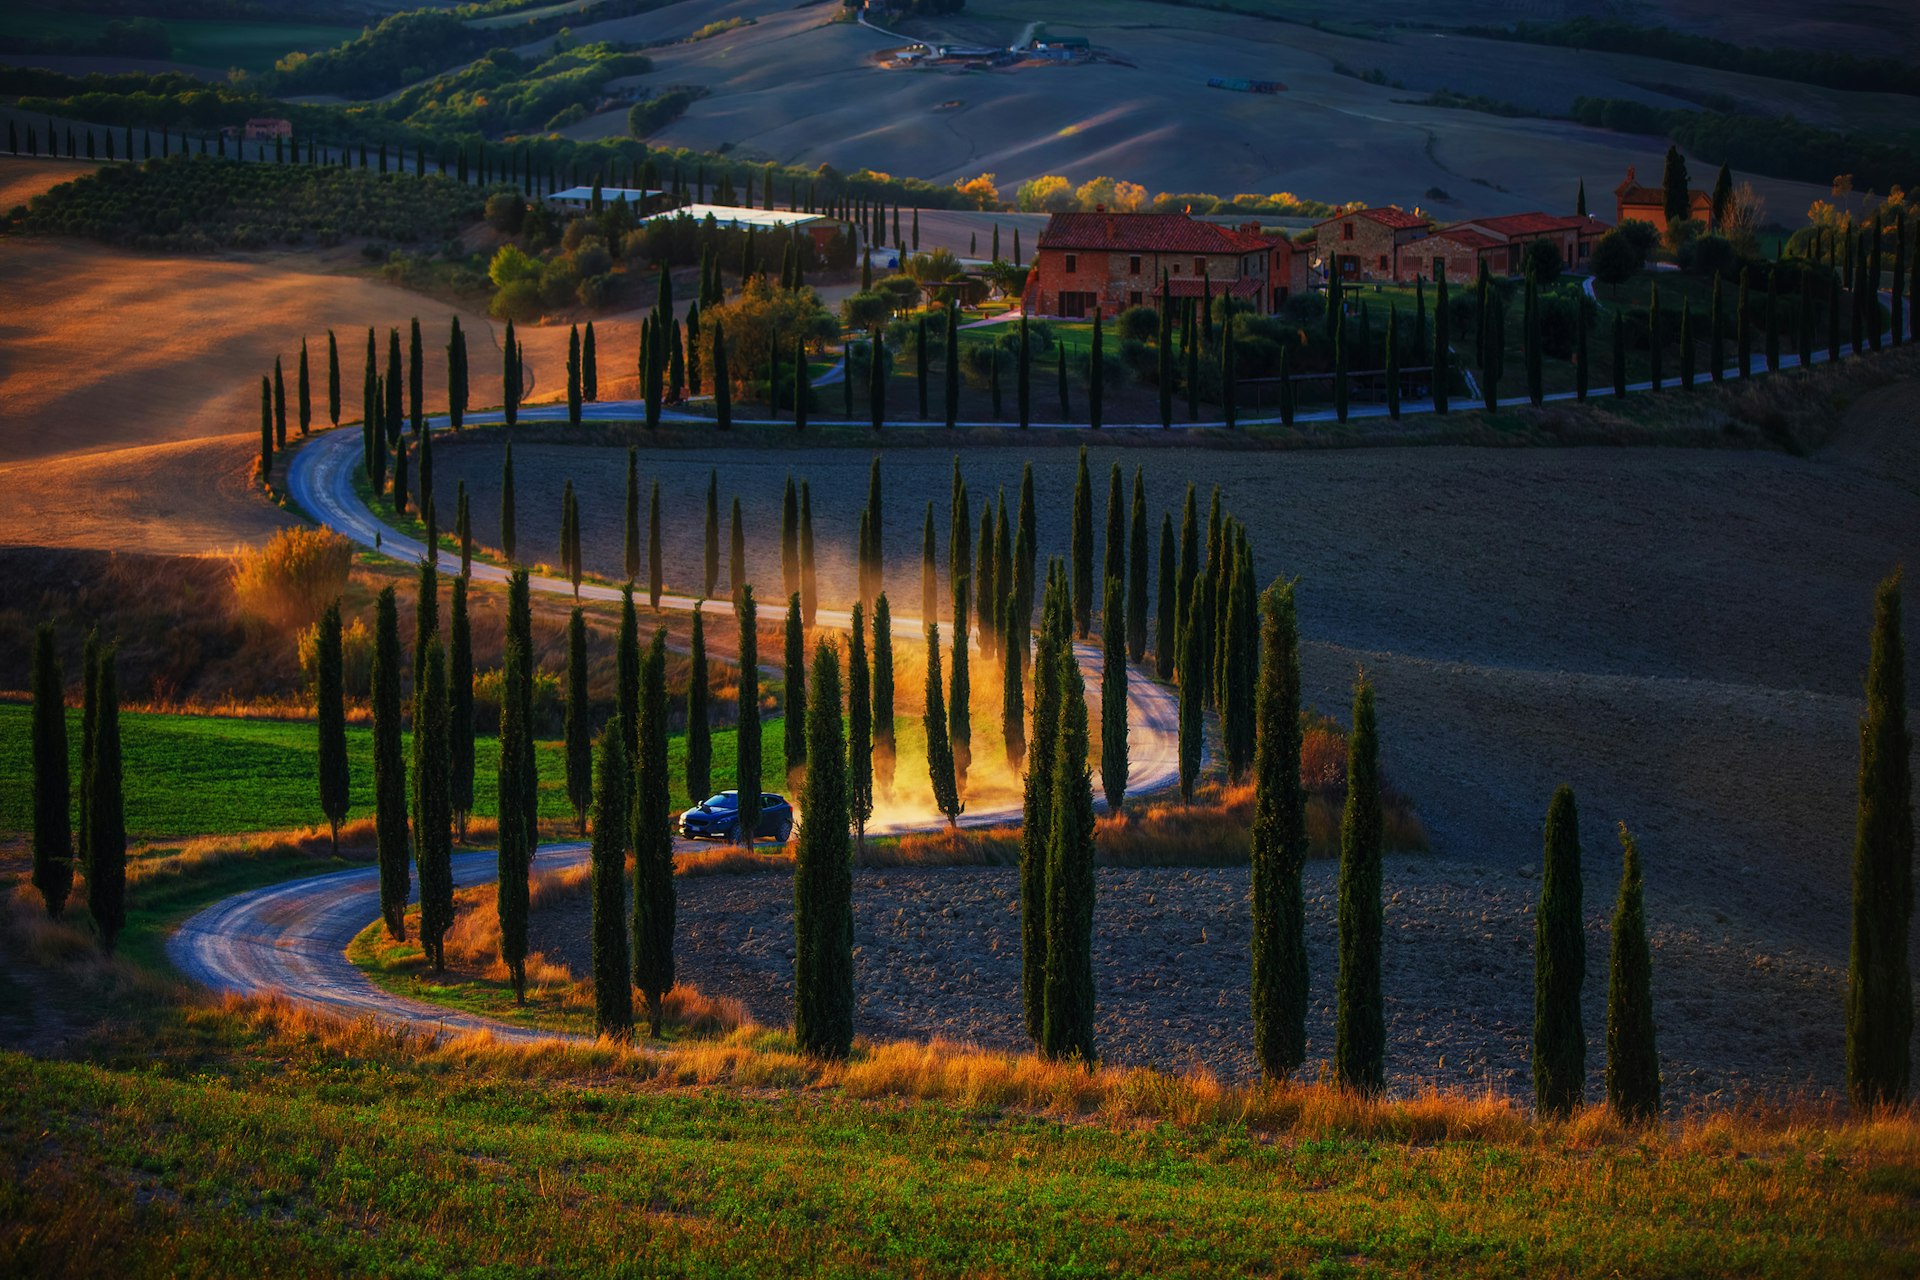 A car drives between the cypresses  trees of rural Tuscany during sunset with its headlights on